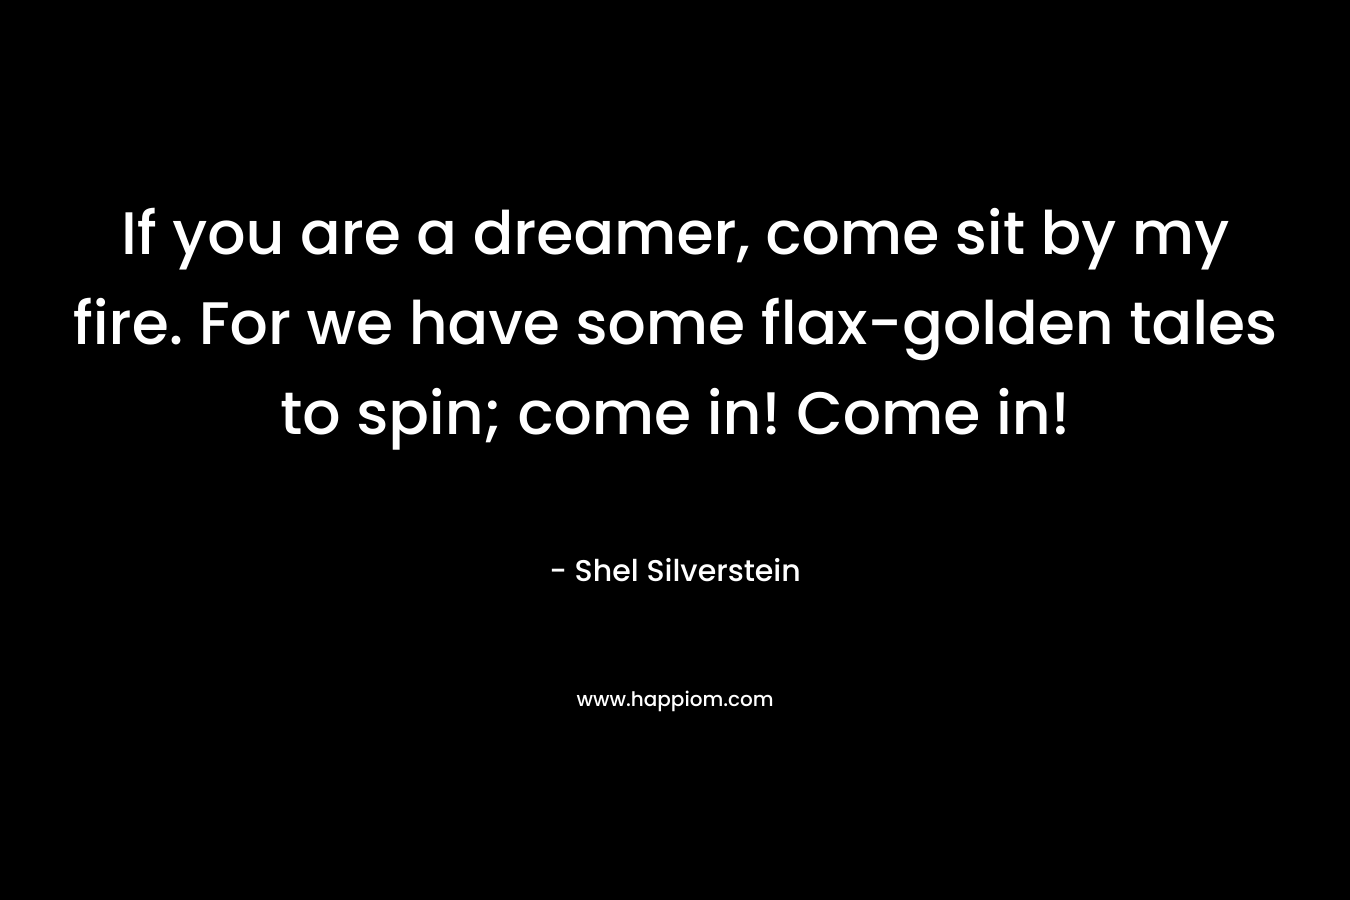 If you are a dreamer, come sit by my fire. For we have some flax-golden tales to spin; come in! Come in!